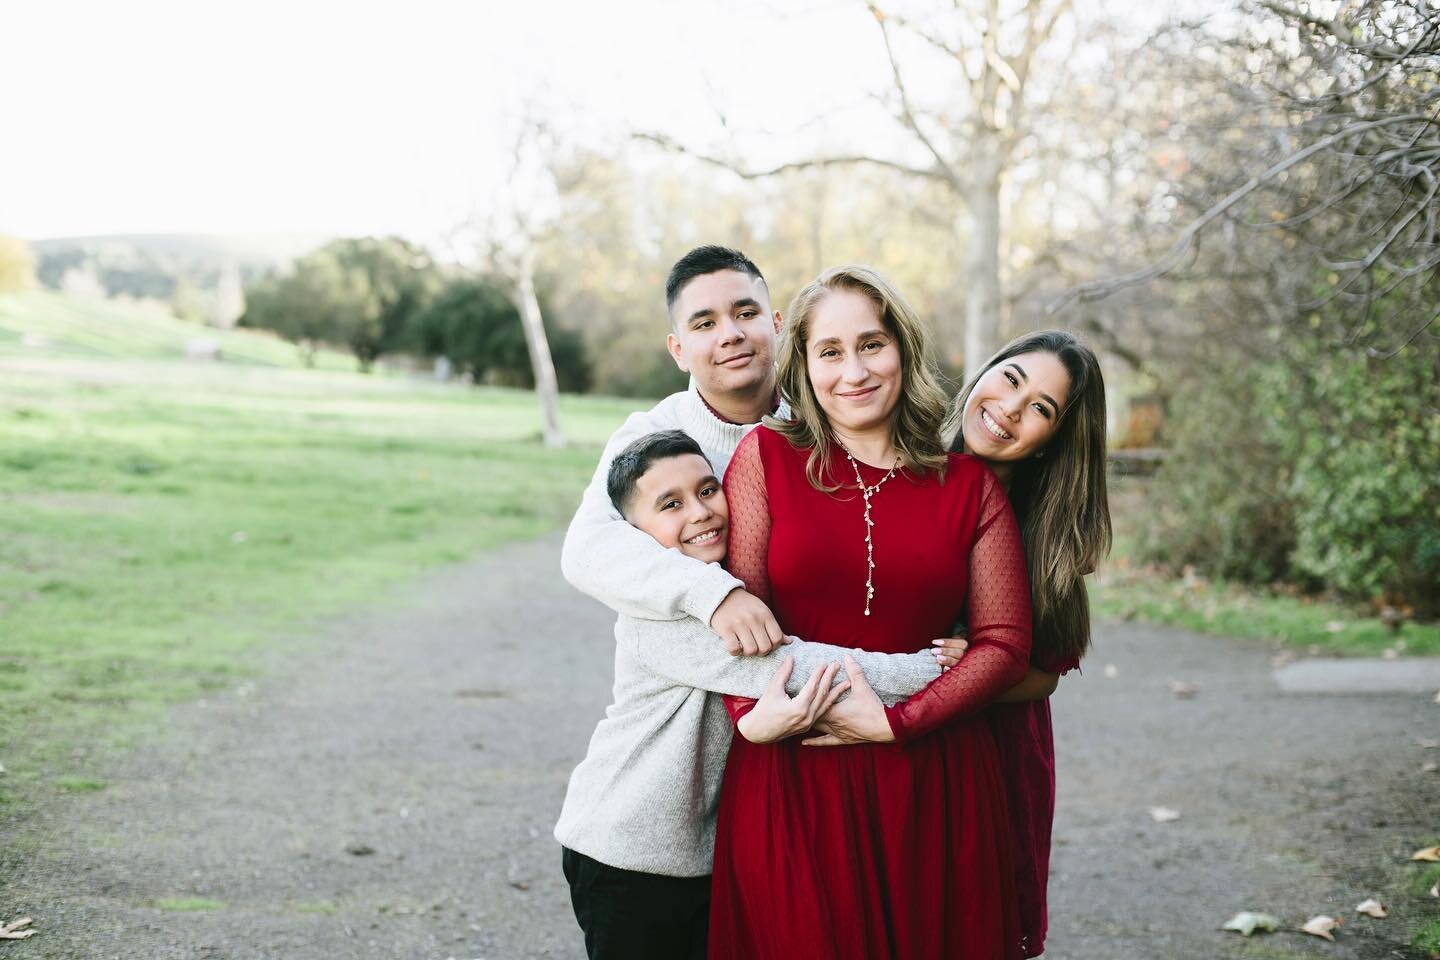 mother of three or their sister? 😍 
what beautiful and warm smiles i had the pleasure of capturing.
.
.
.
.
.
.
.
.
.
.
.
.
#familyphotography #familyphotographer #bayareaphotographer #nikond750 #simplychildren
#familyportraits #norcalphotographer #